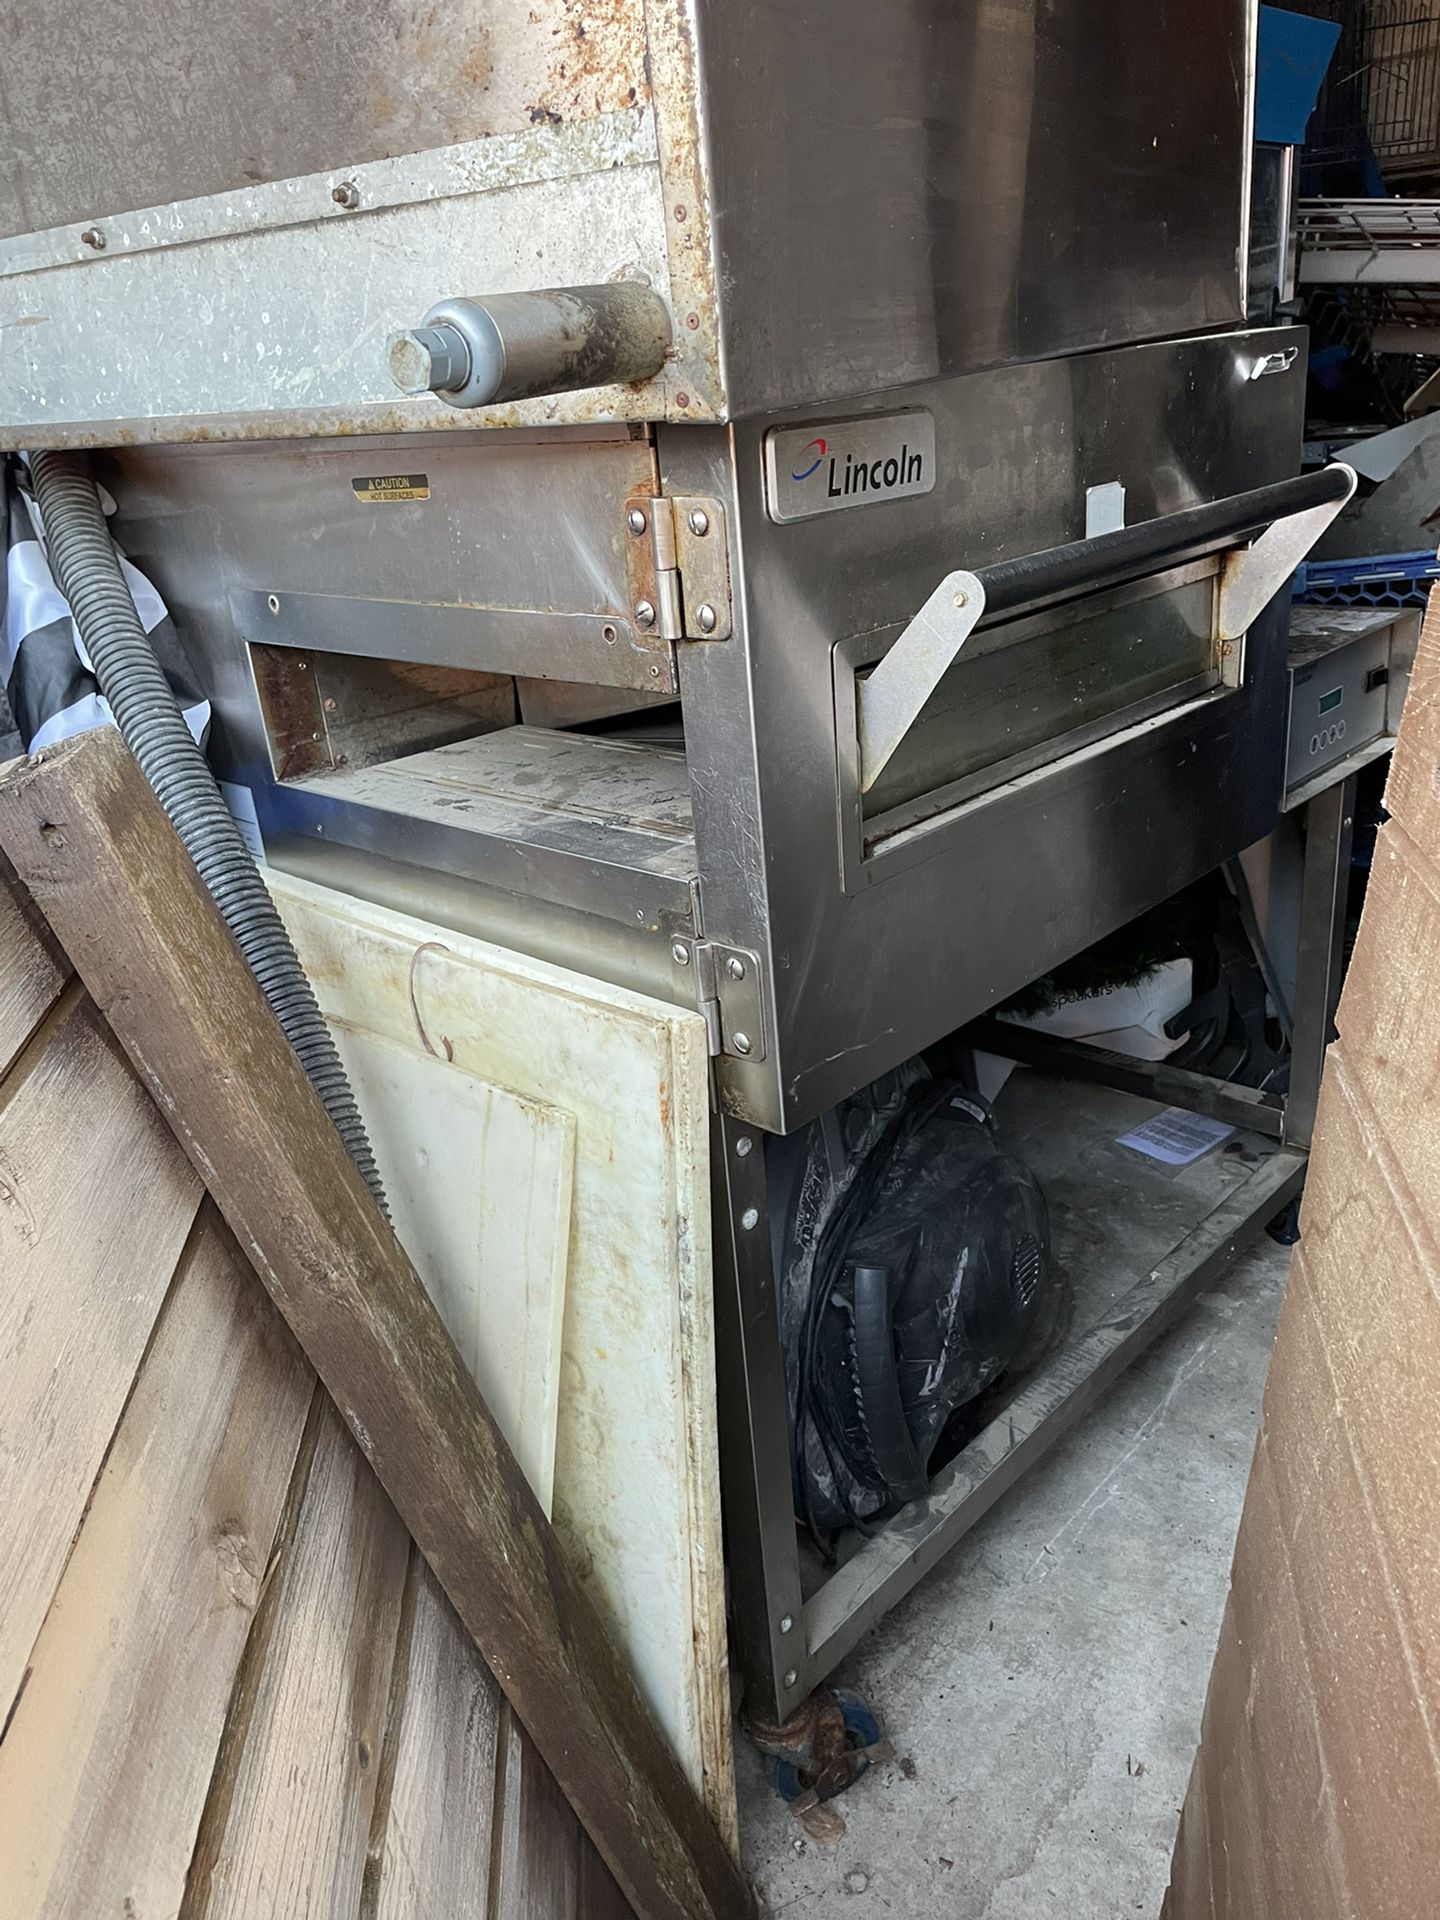 Impinger Conveyer Oven (Lincoln )